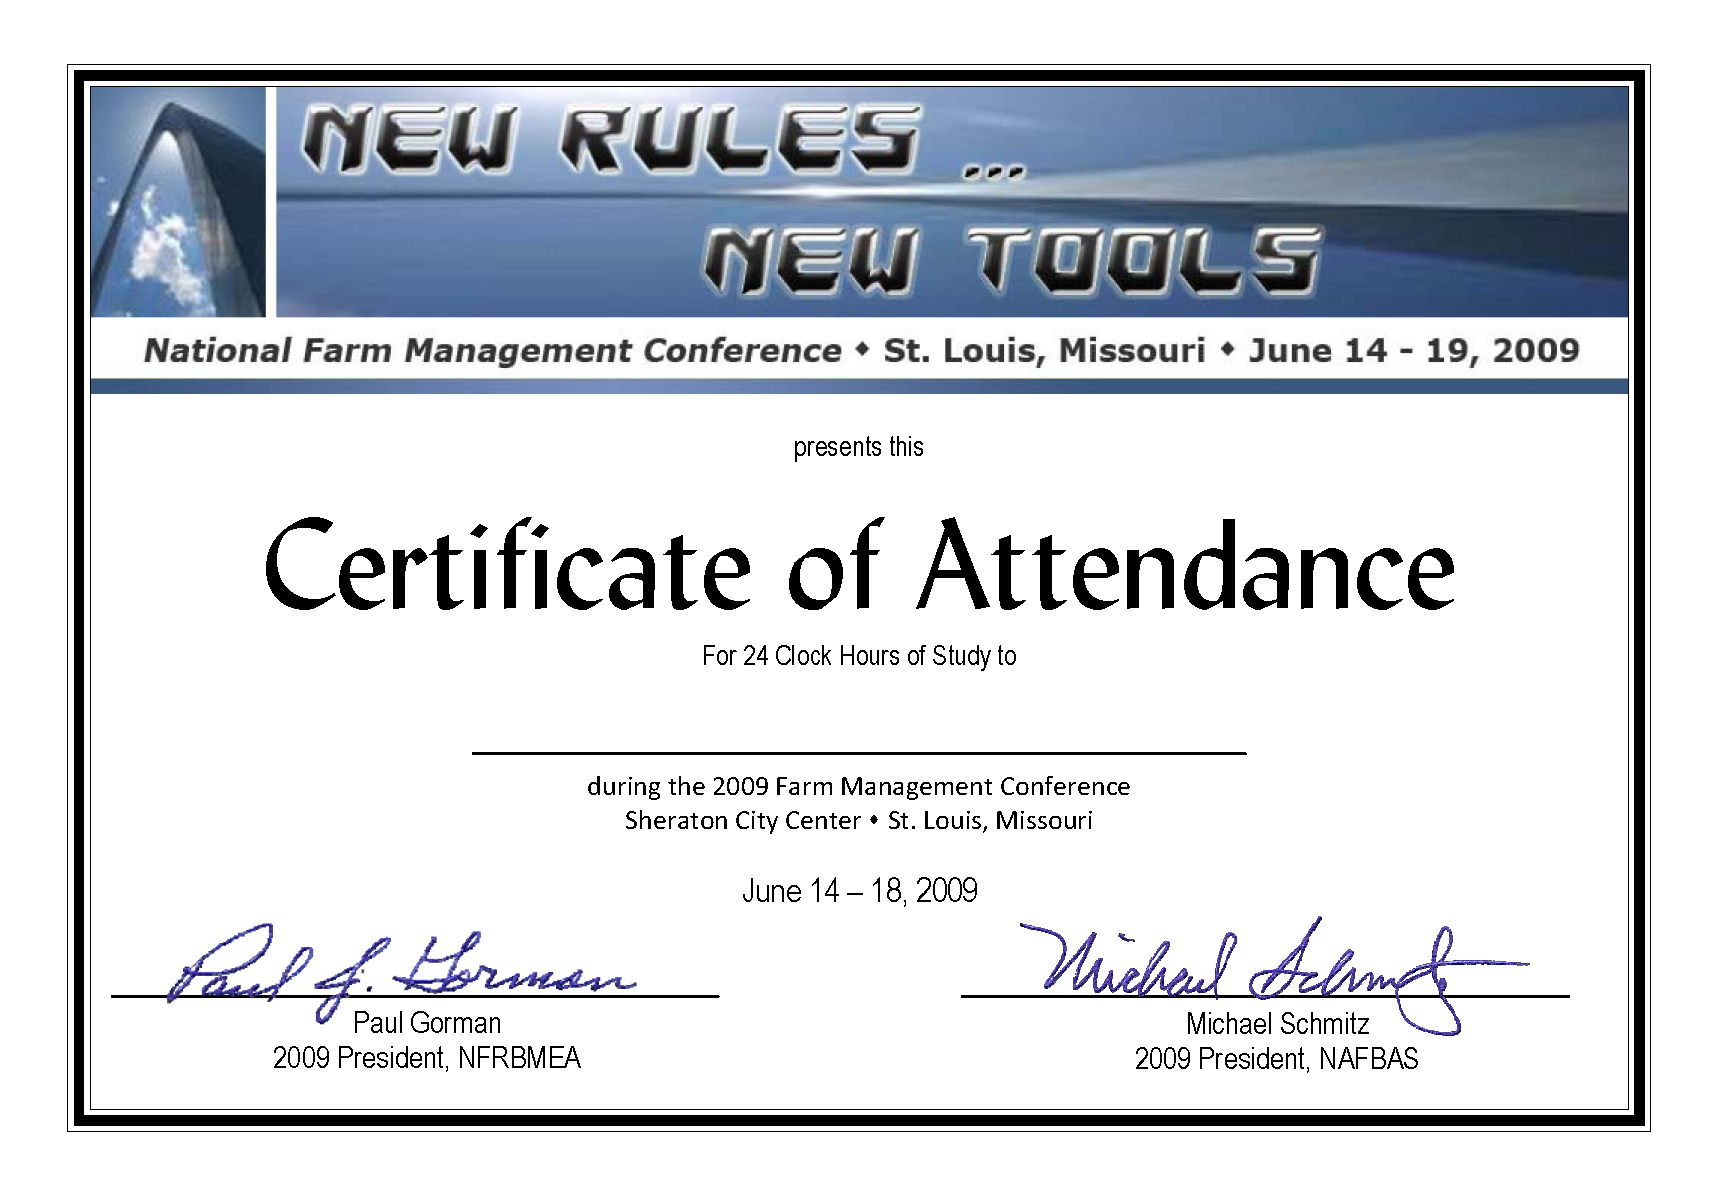 Conference Certificate Of Attendance Template - Great With Conference Certificate Of Attendance Template